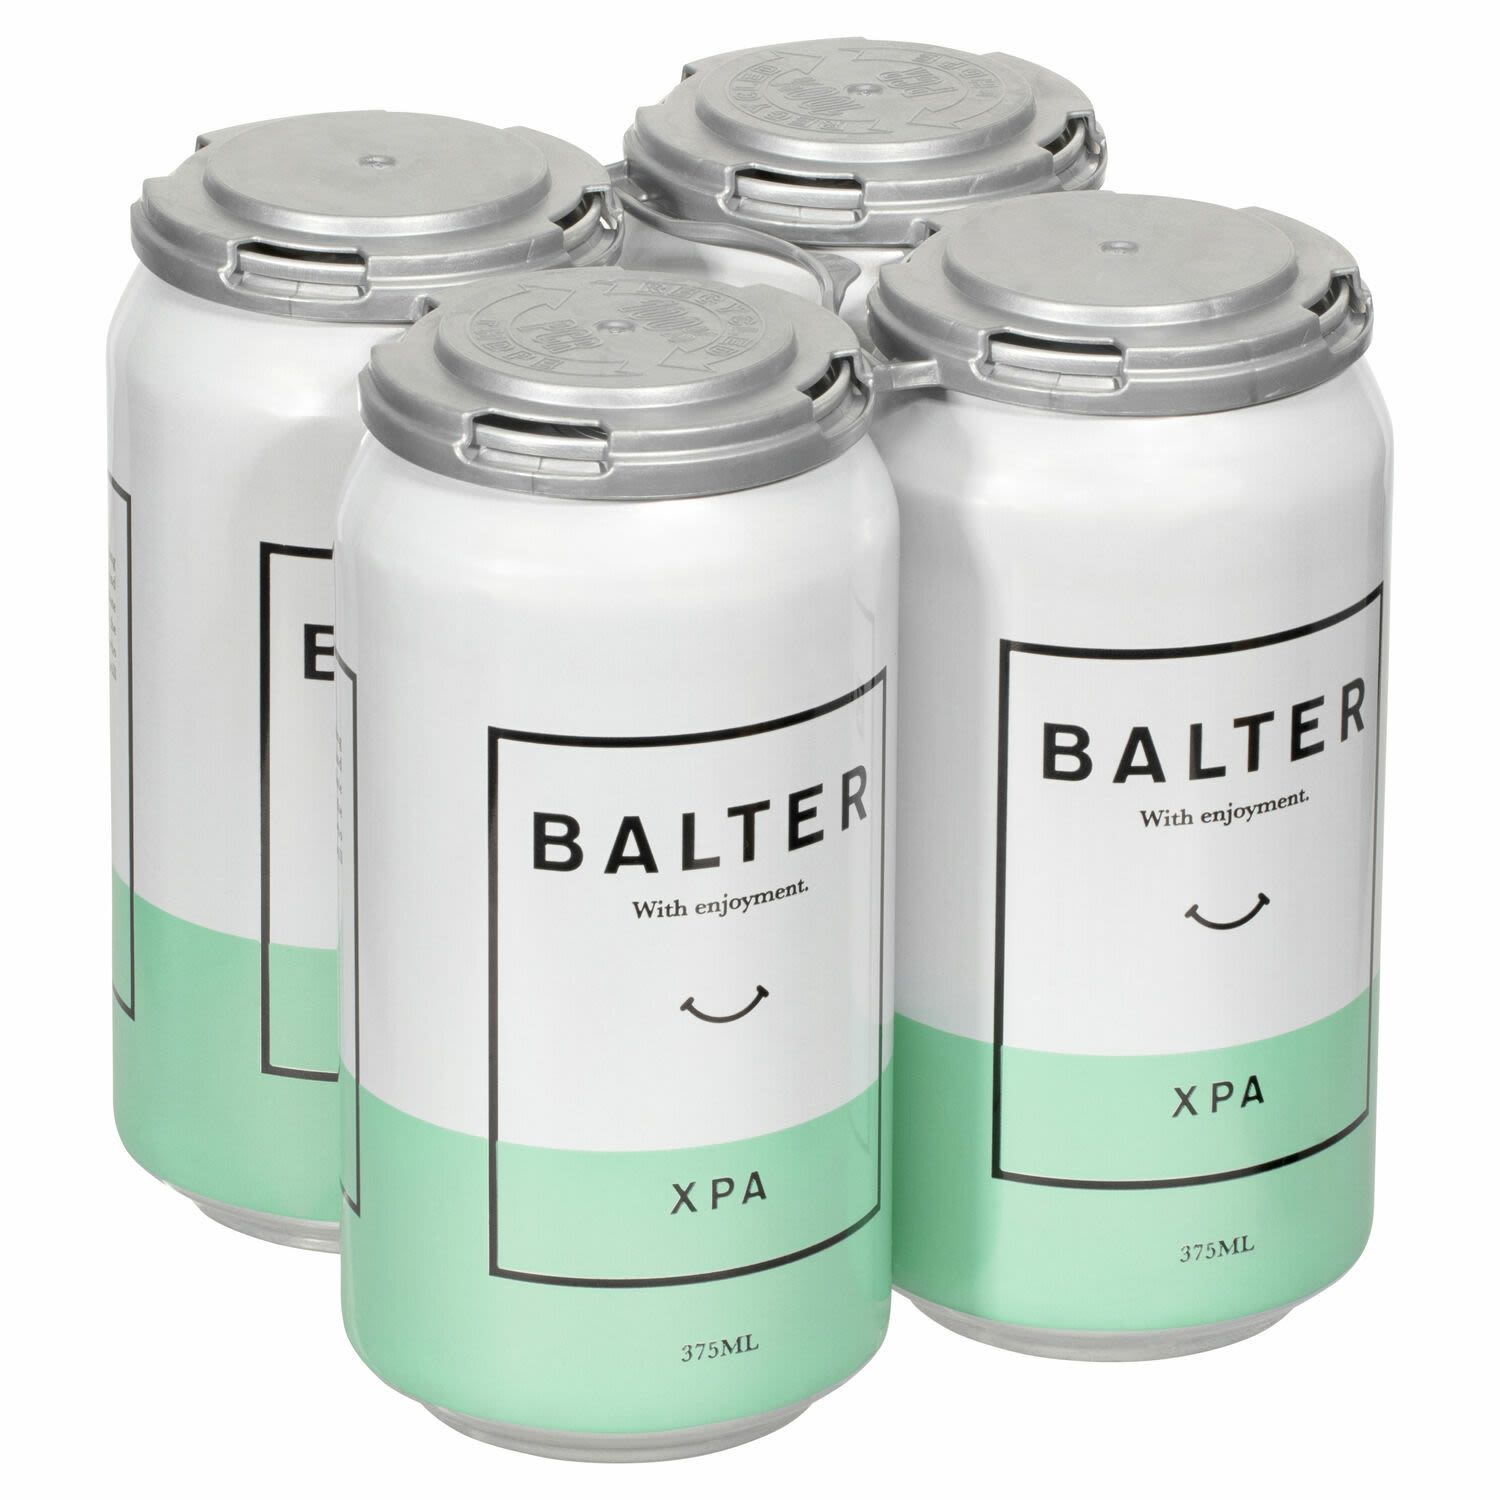 Balter XPA Can 375mL 4 Pack